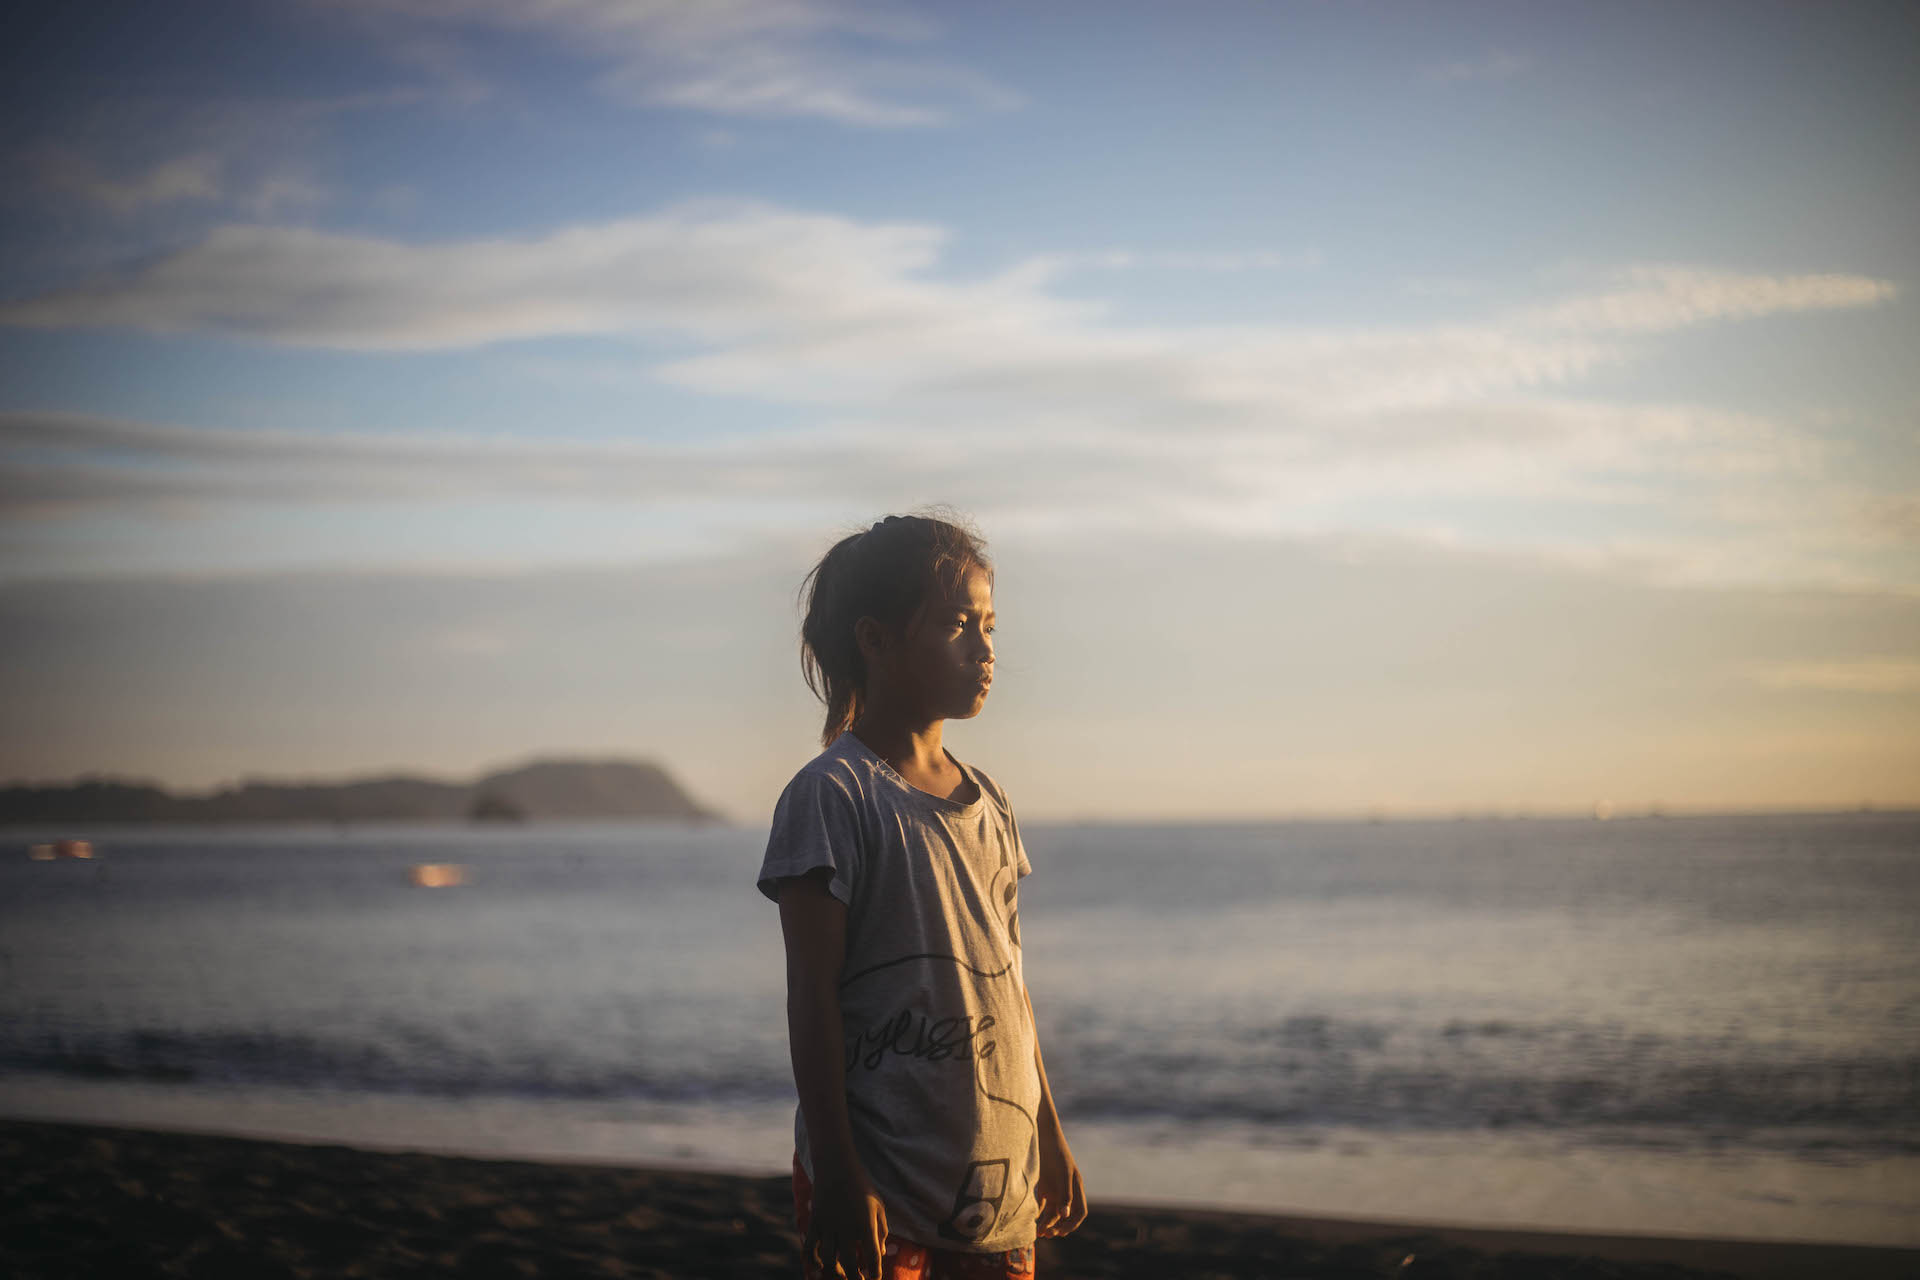 An Indonesian girl stands on a beach at sunset.